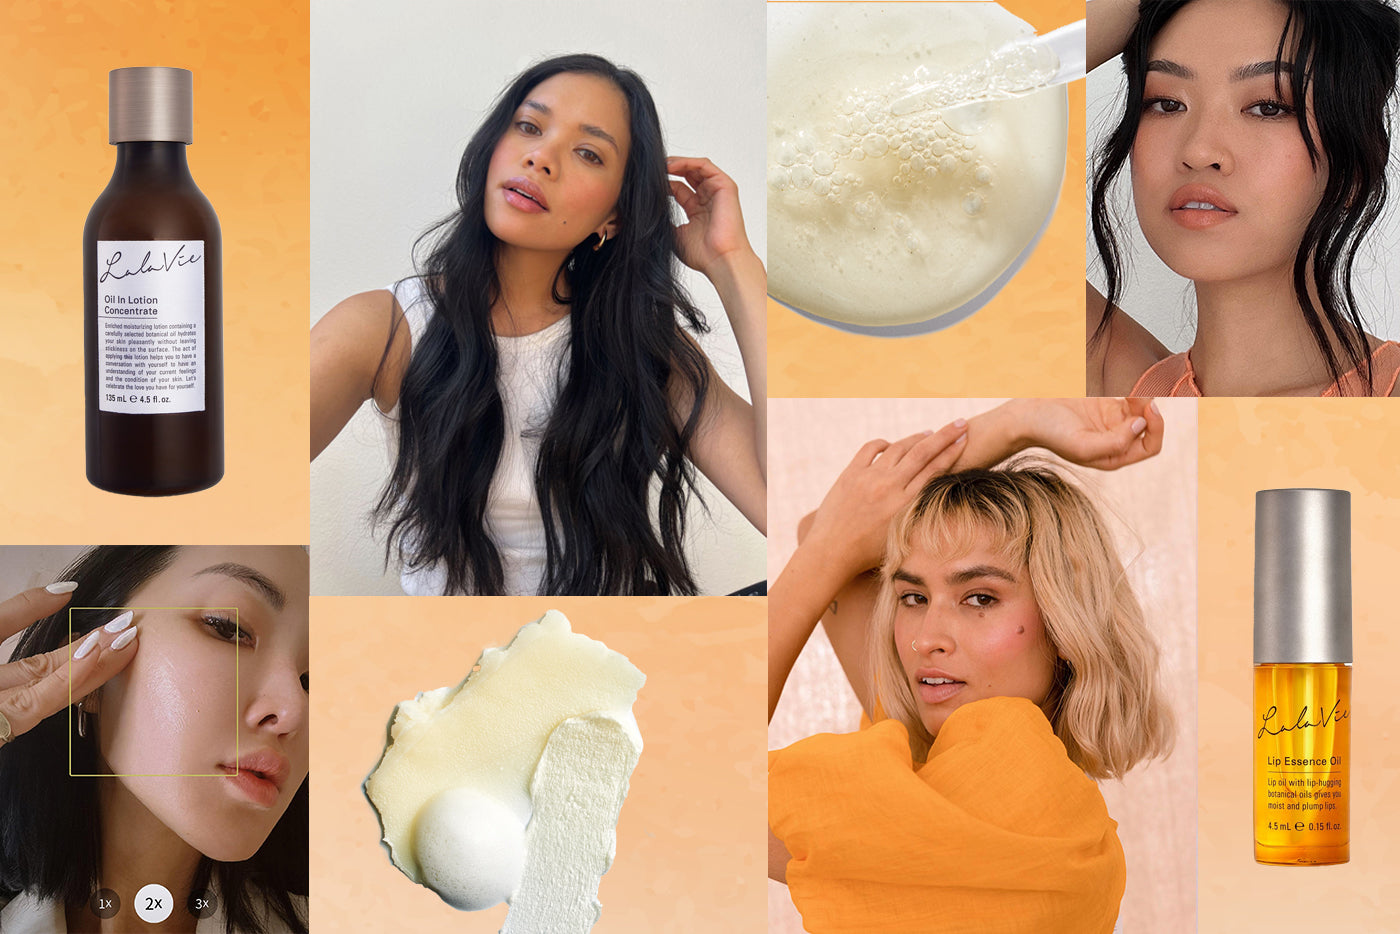 The Best 6 J-Beauty Influencers you should follow today